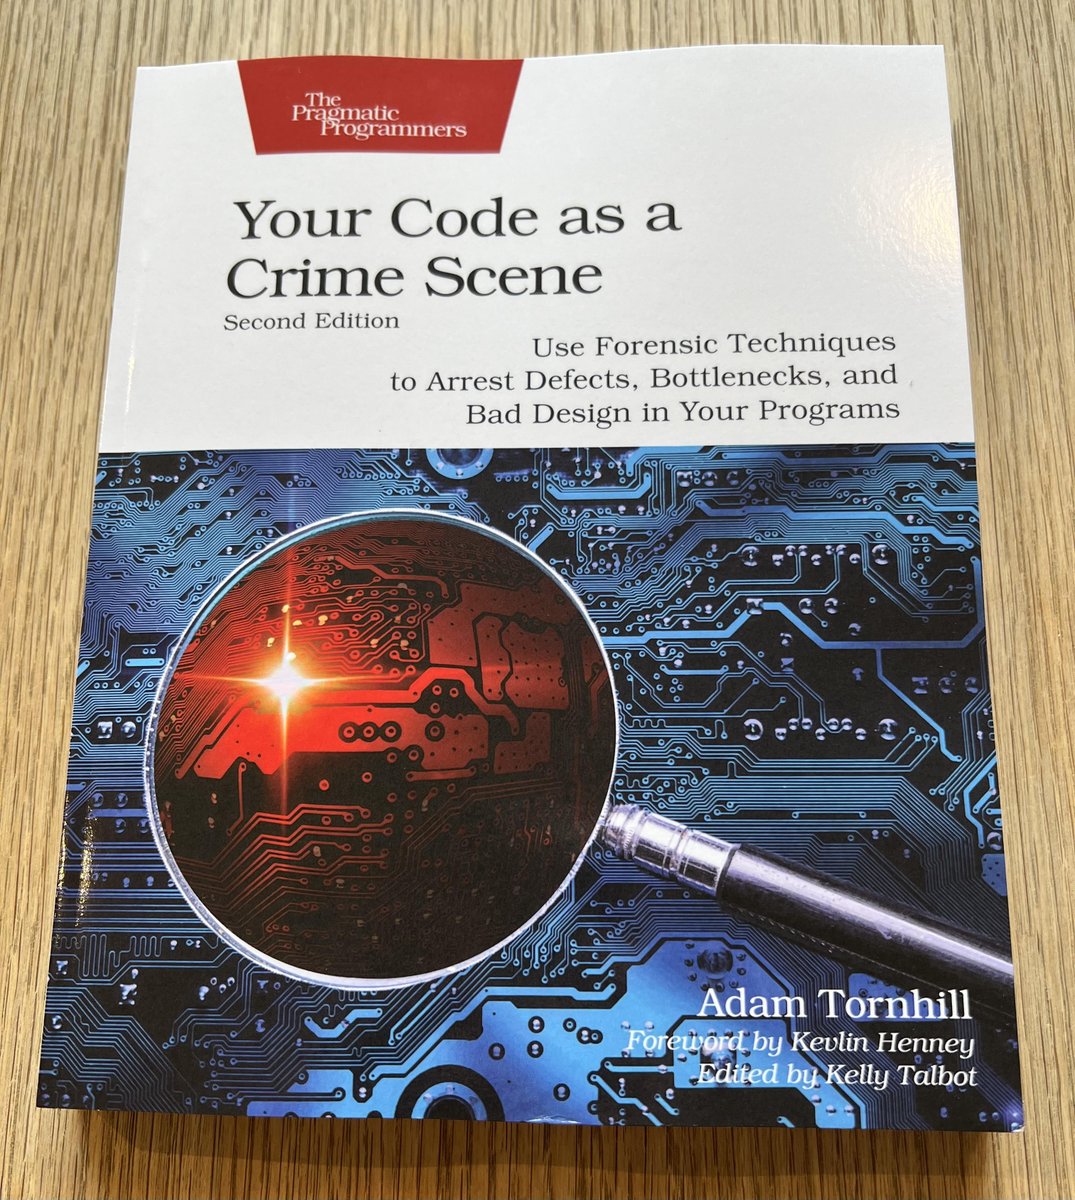 Got my copy of 'Your Code as a Crime Scene' (2nd edition) by @AdamTornhill in the mail today. Tools like CodeScene (and more broadly, the techniques discussed in the book) will become even more important as AI-generated code becomes more prevalent.